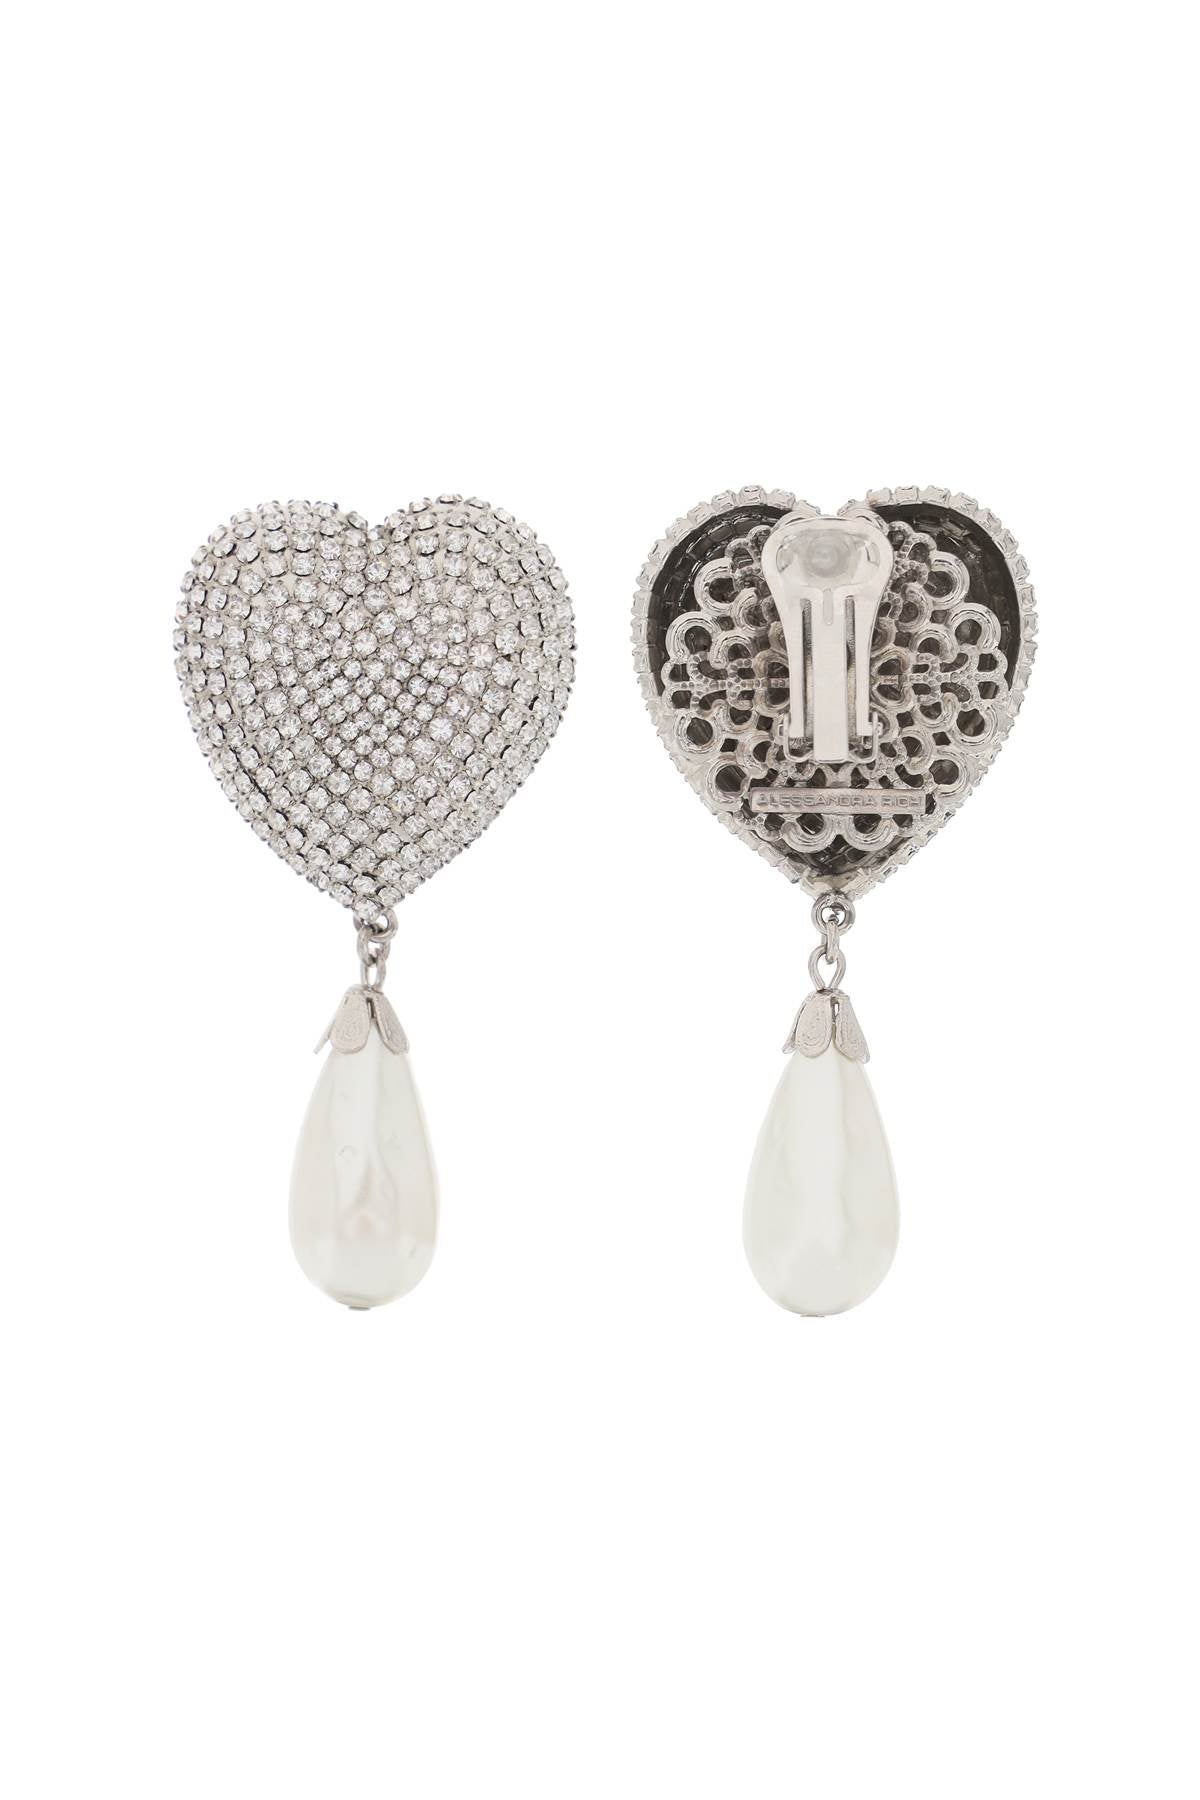 Alessandra rich heart crystal earrings with pearls-2